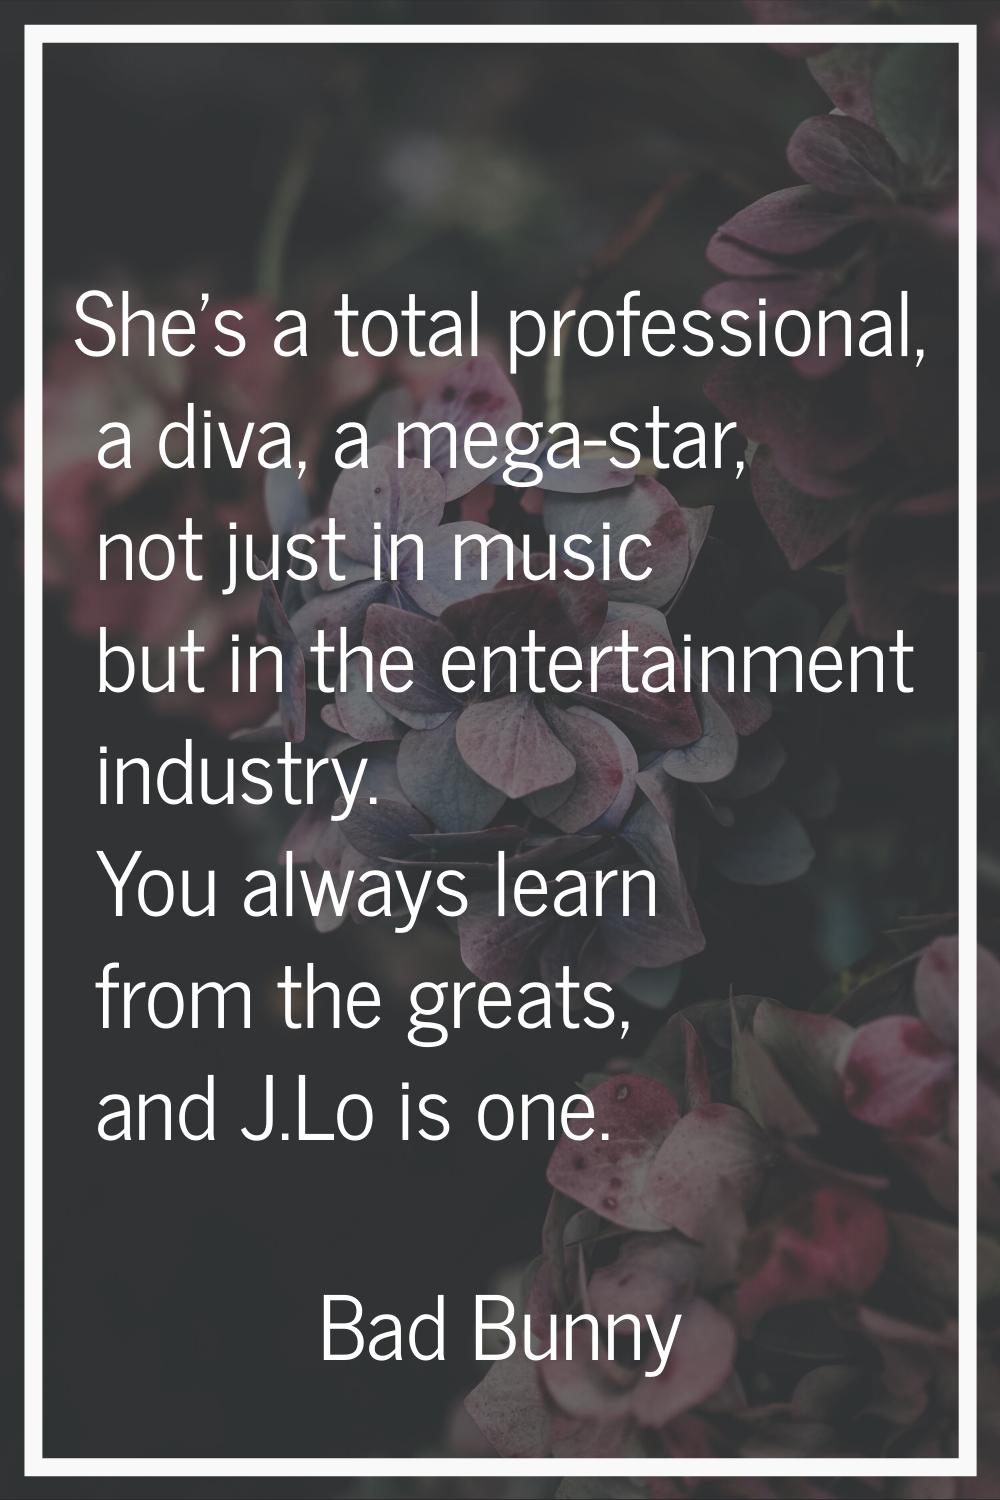 She's a total professional, a diva, a mega-star, not just in music but in the entertainment industr